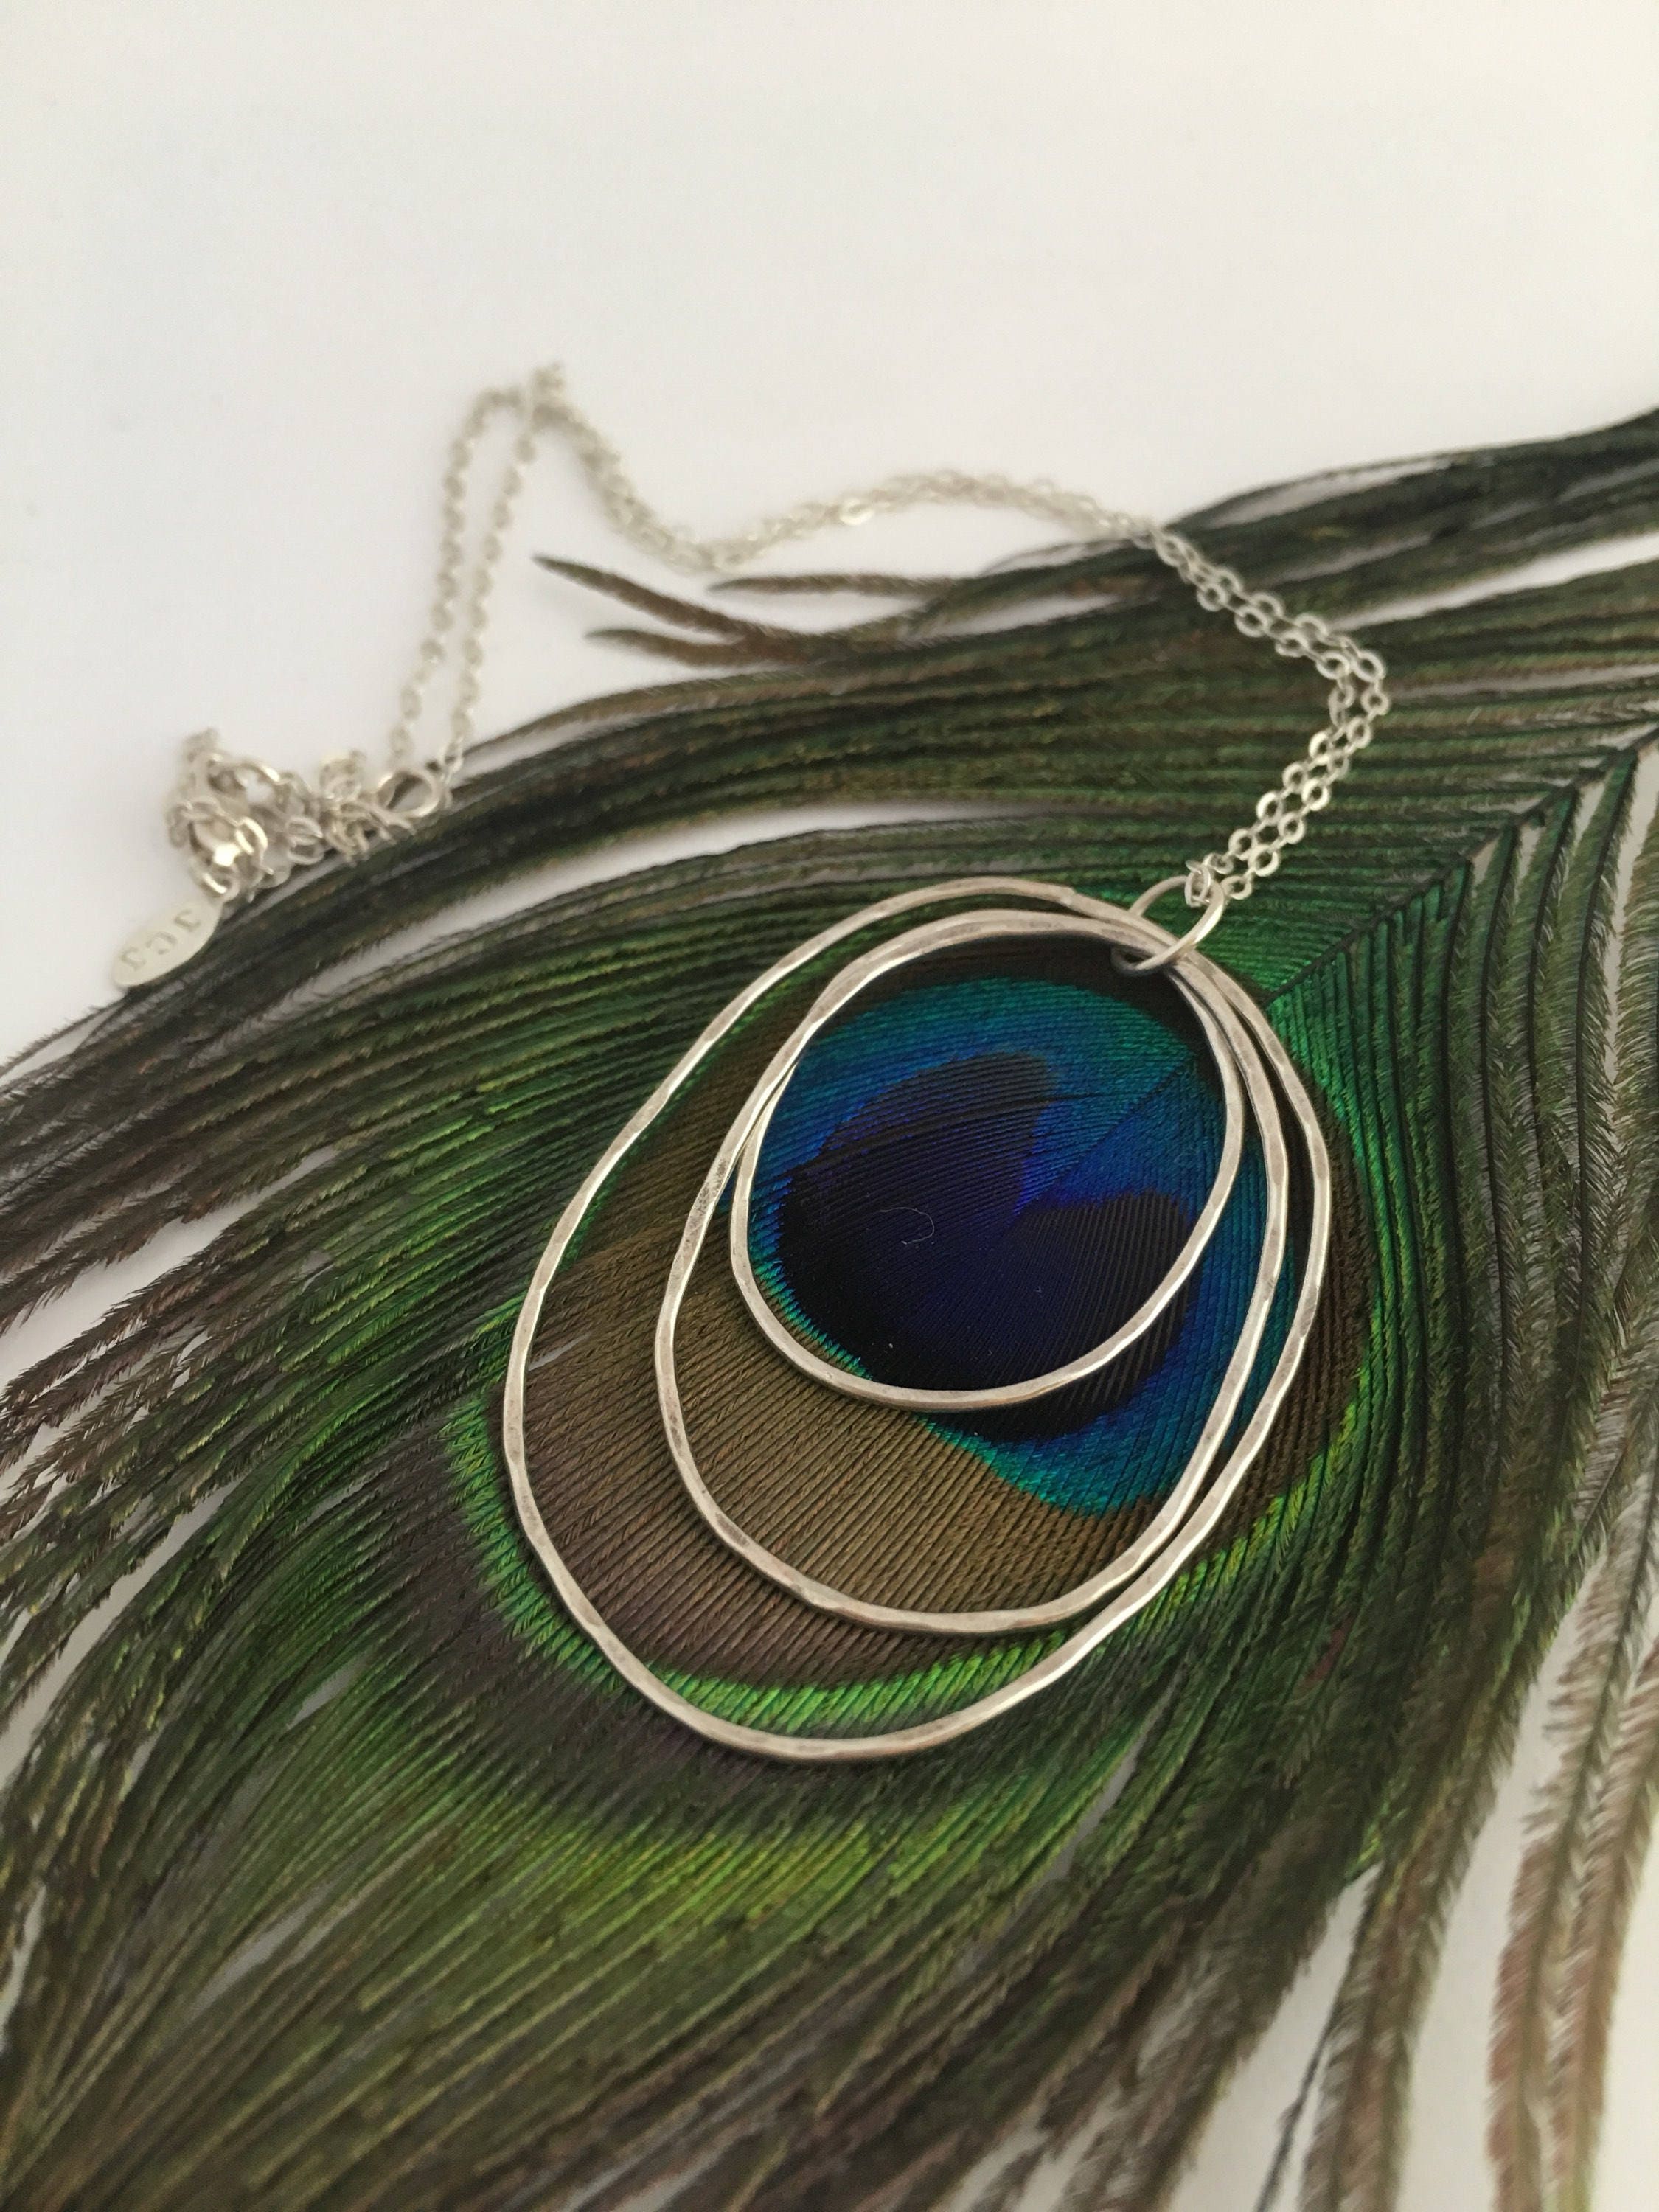 Peacock Feather Necklace Galaxy Swirl Necklace Silver Abstract | Etsy